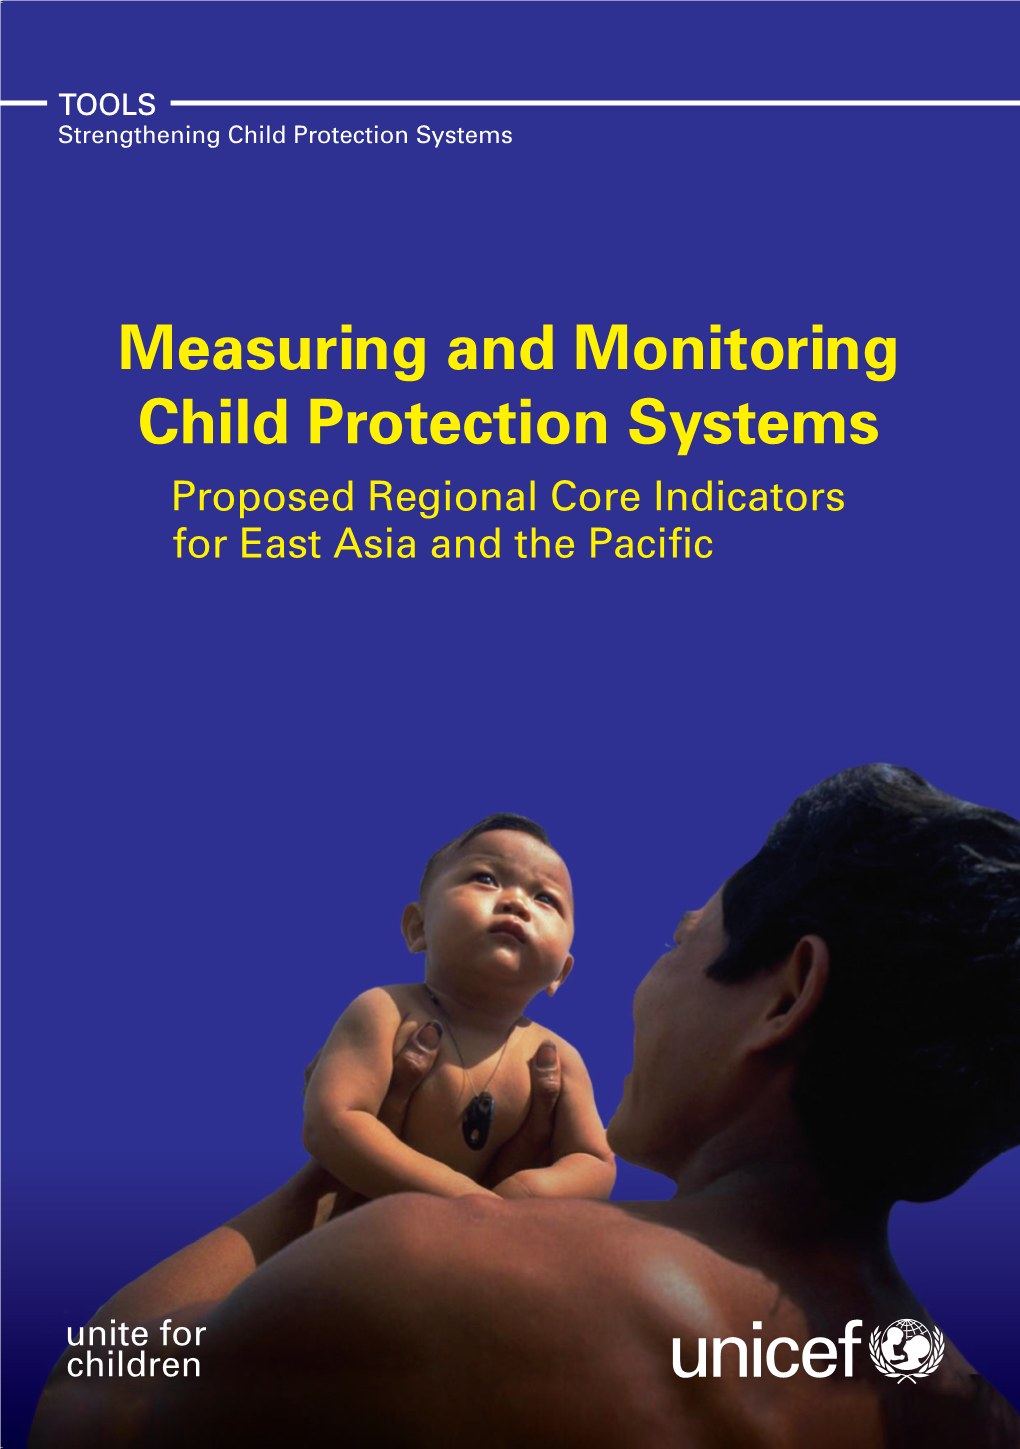 Measuring and Monitoring Child Protection Systems Proposed Regional Core Indicators for East Asia and the Pacific